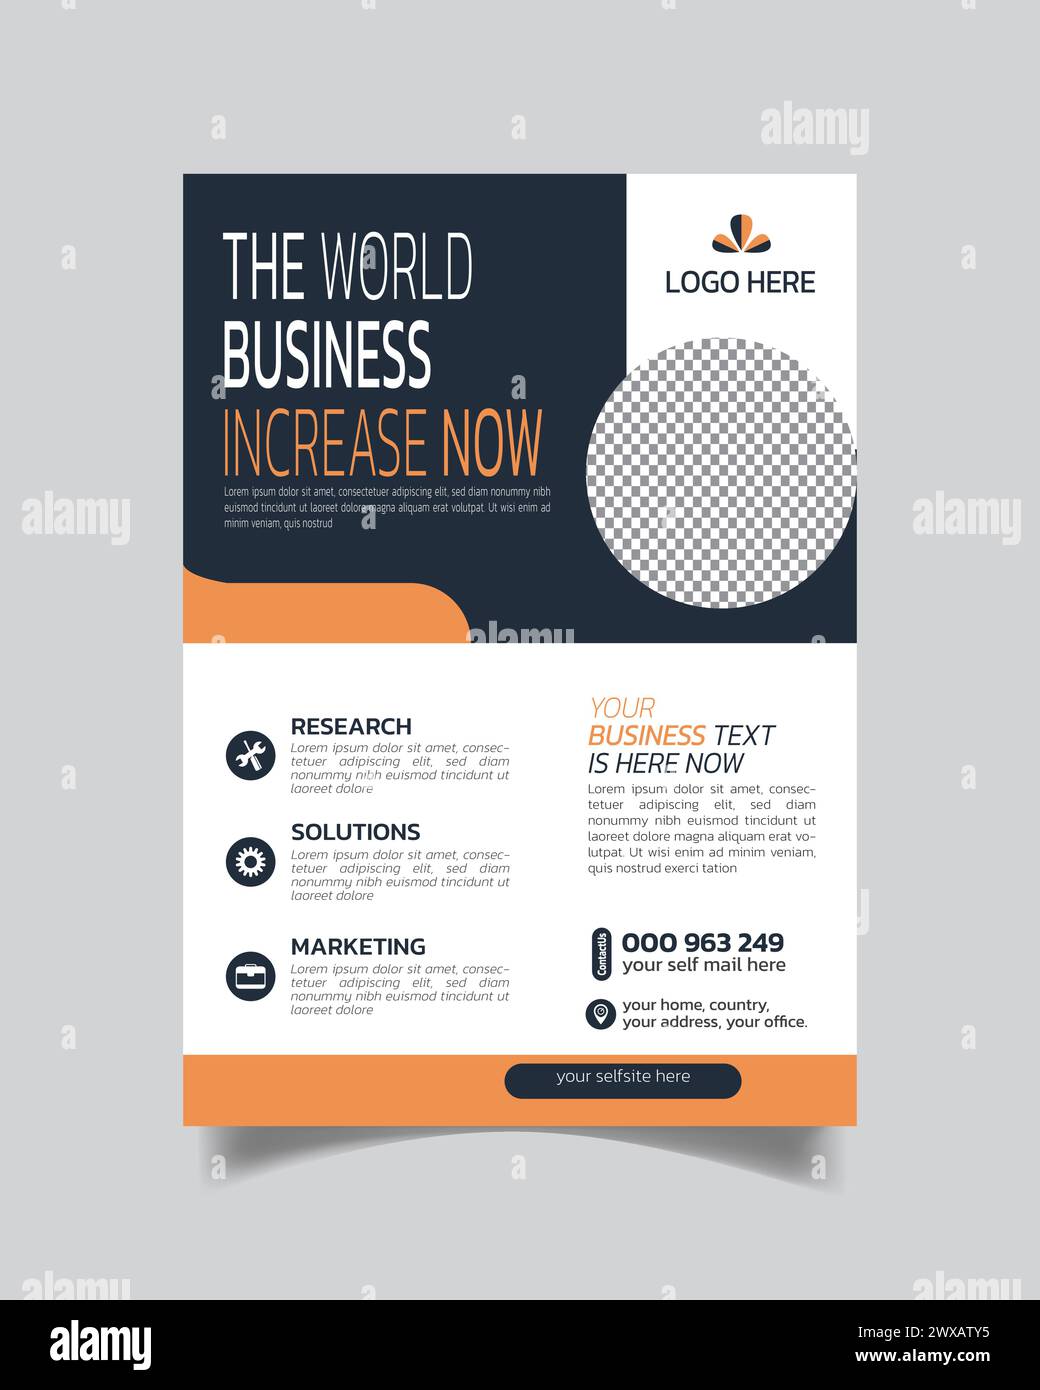 Clean Design Agency Flyer and Tidy Business Leaflet Template Stock Vector